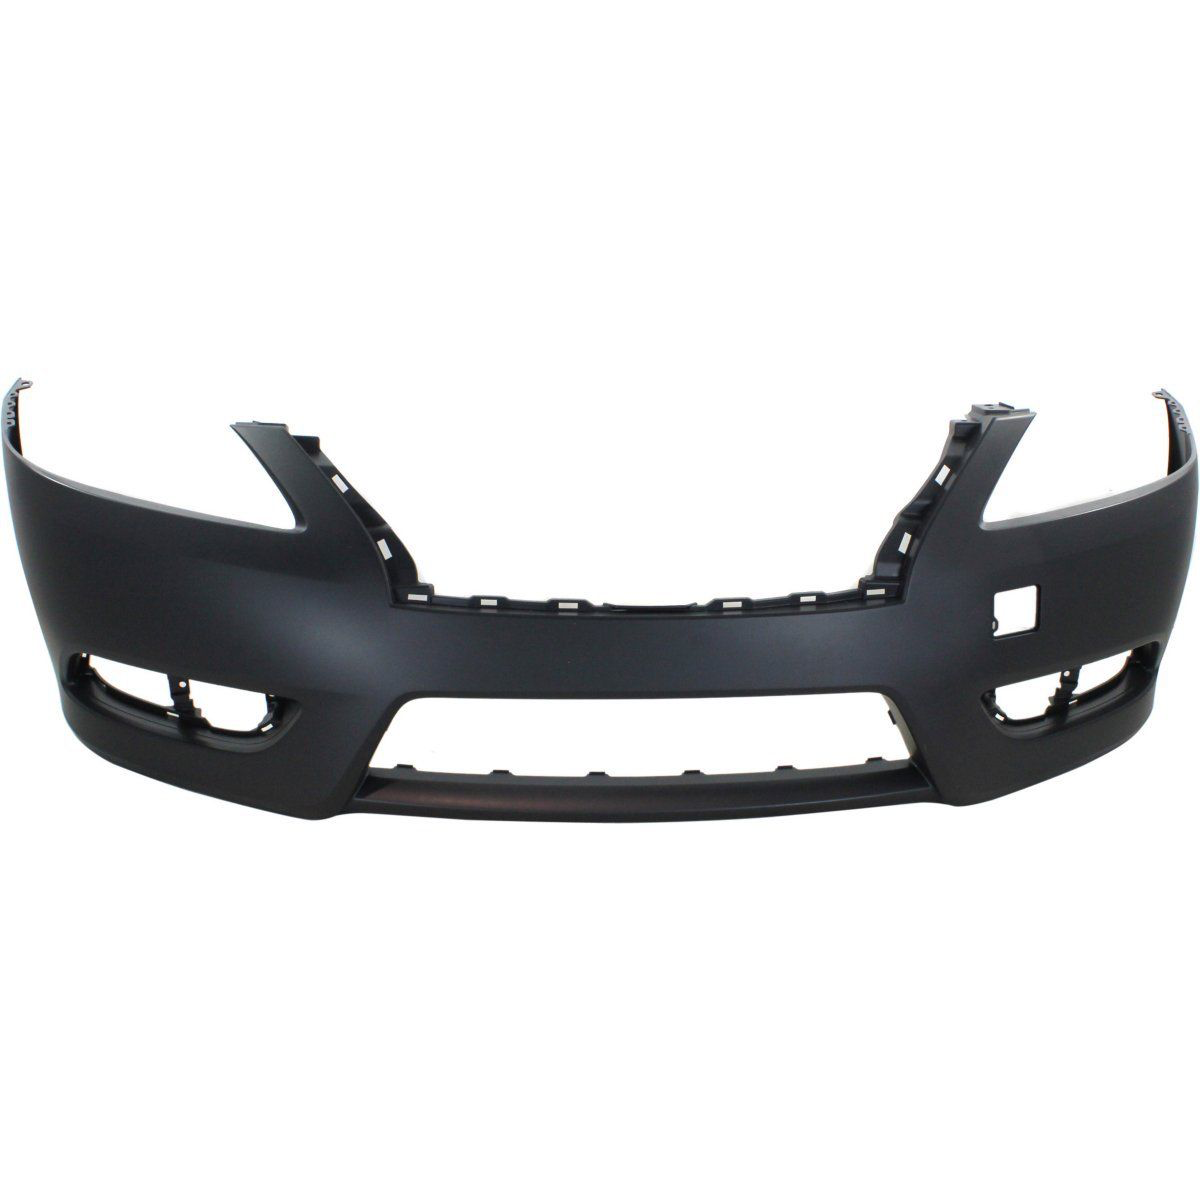 2013-2015 NISSAN SENTRA Front Bumper Cover S|SL|SV Painted to Match